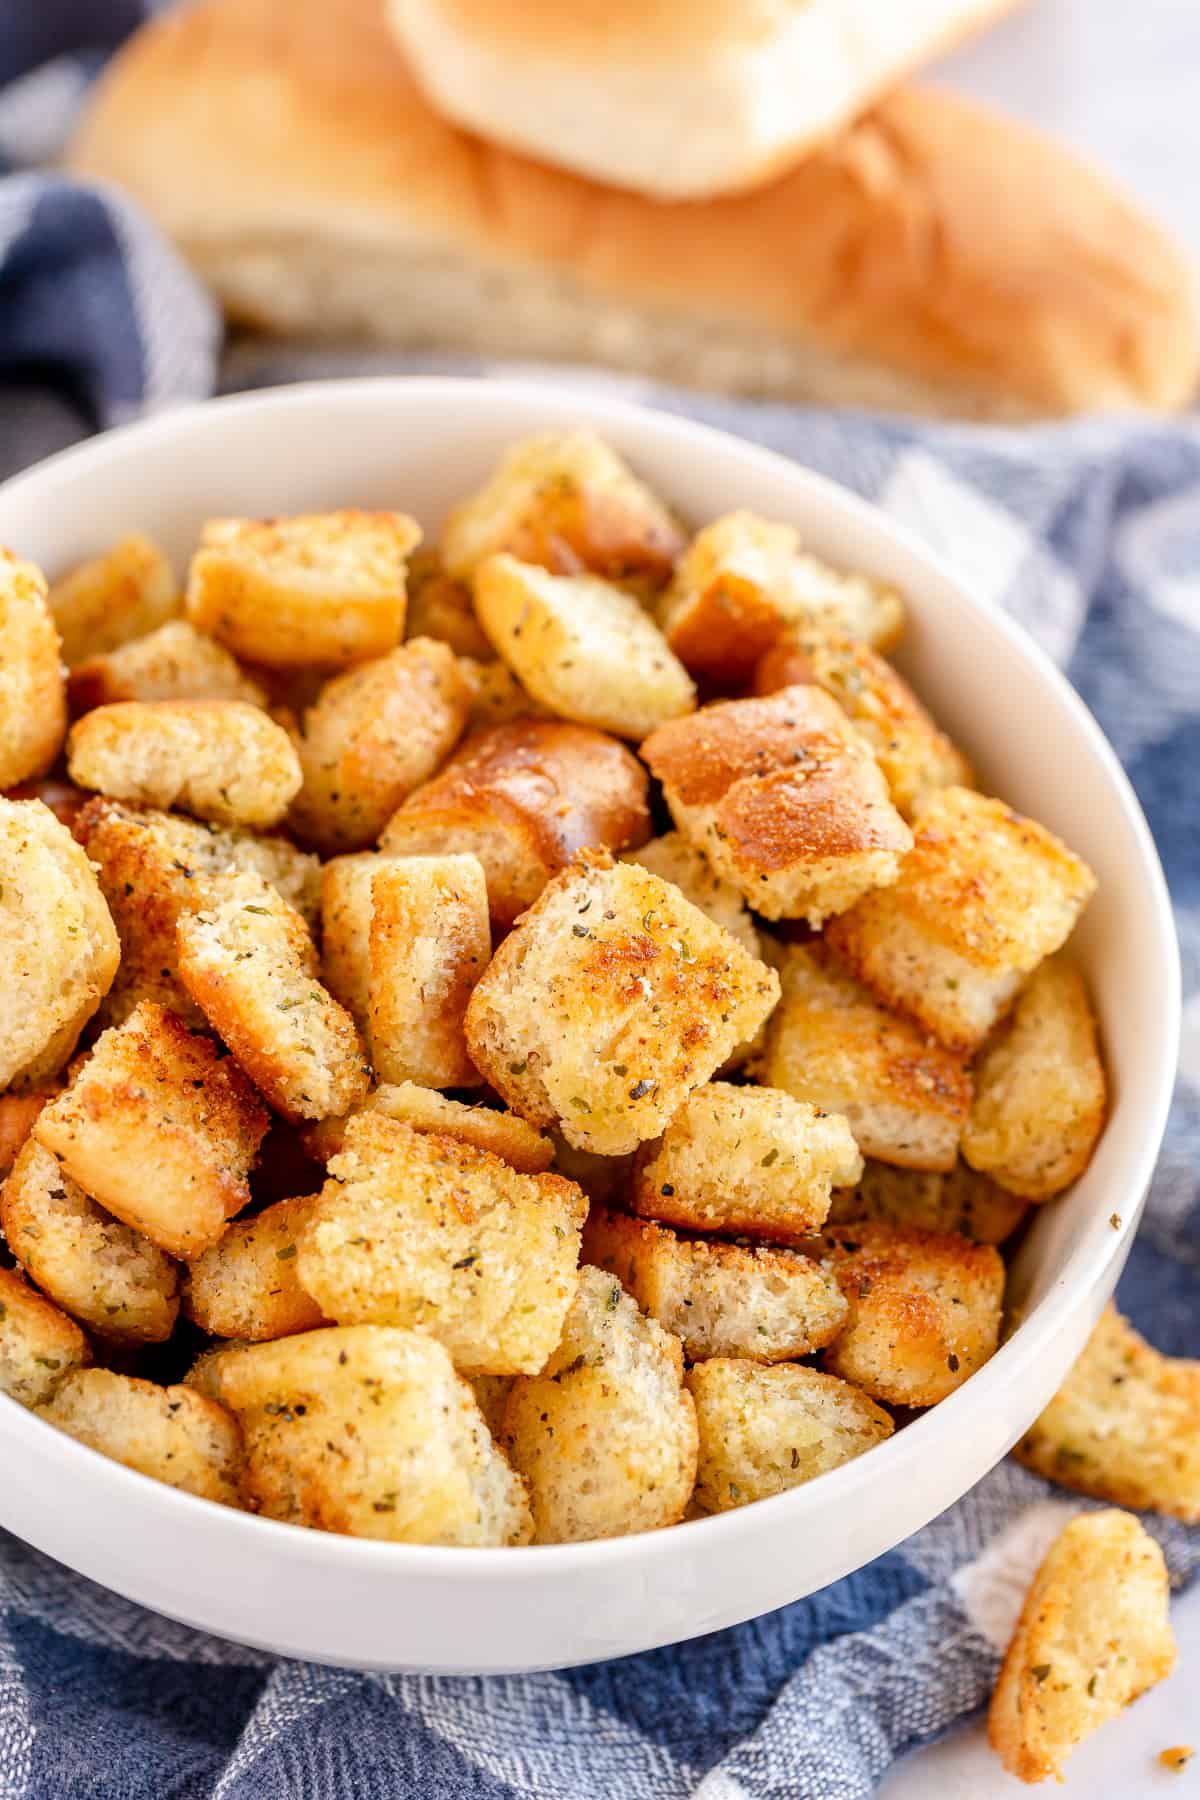 Croutons made with leftover hot dog buns in a white bowl.